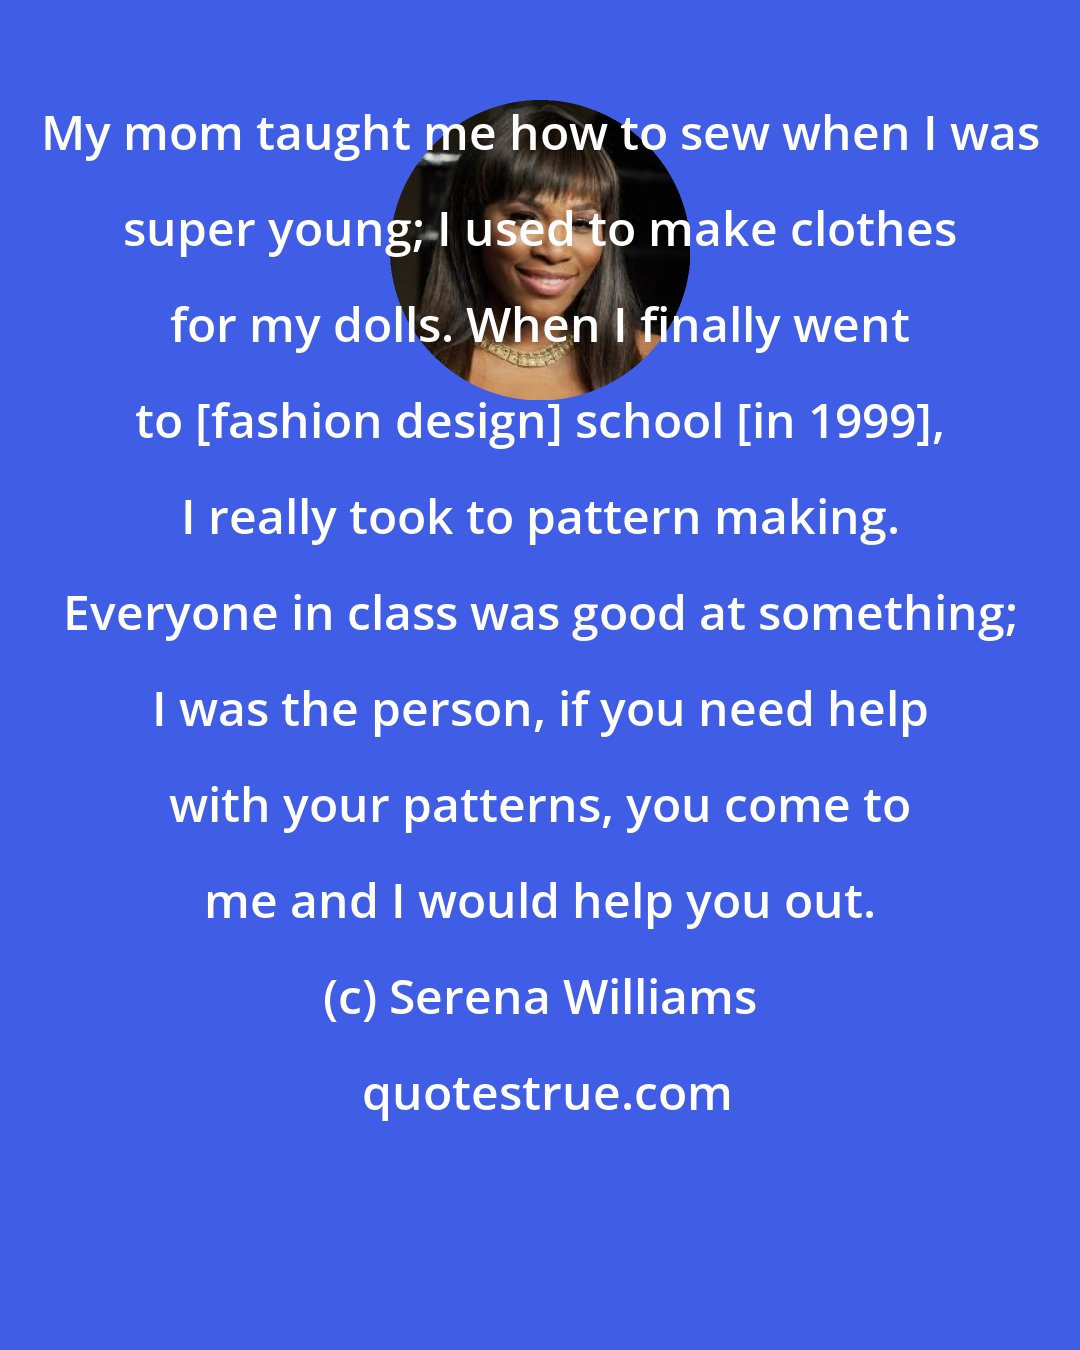 Serena Williams: My mom taught me how to sew when I was super young; I used to make clothes for my dolls. When I finally went to [fashion design] school [in 1999], I really took to pattern making. Everyone in class was good at something; I was the person, if you need help with your patterns, you come to me and I would help you out.